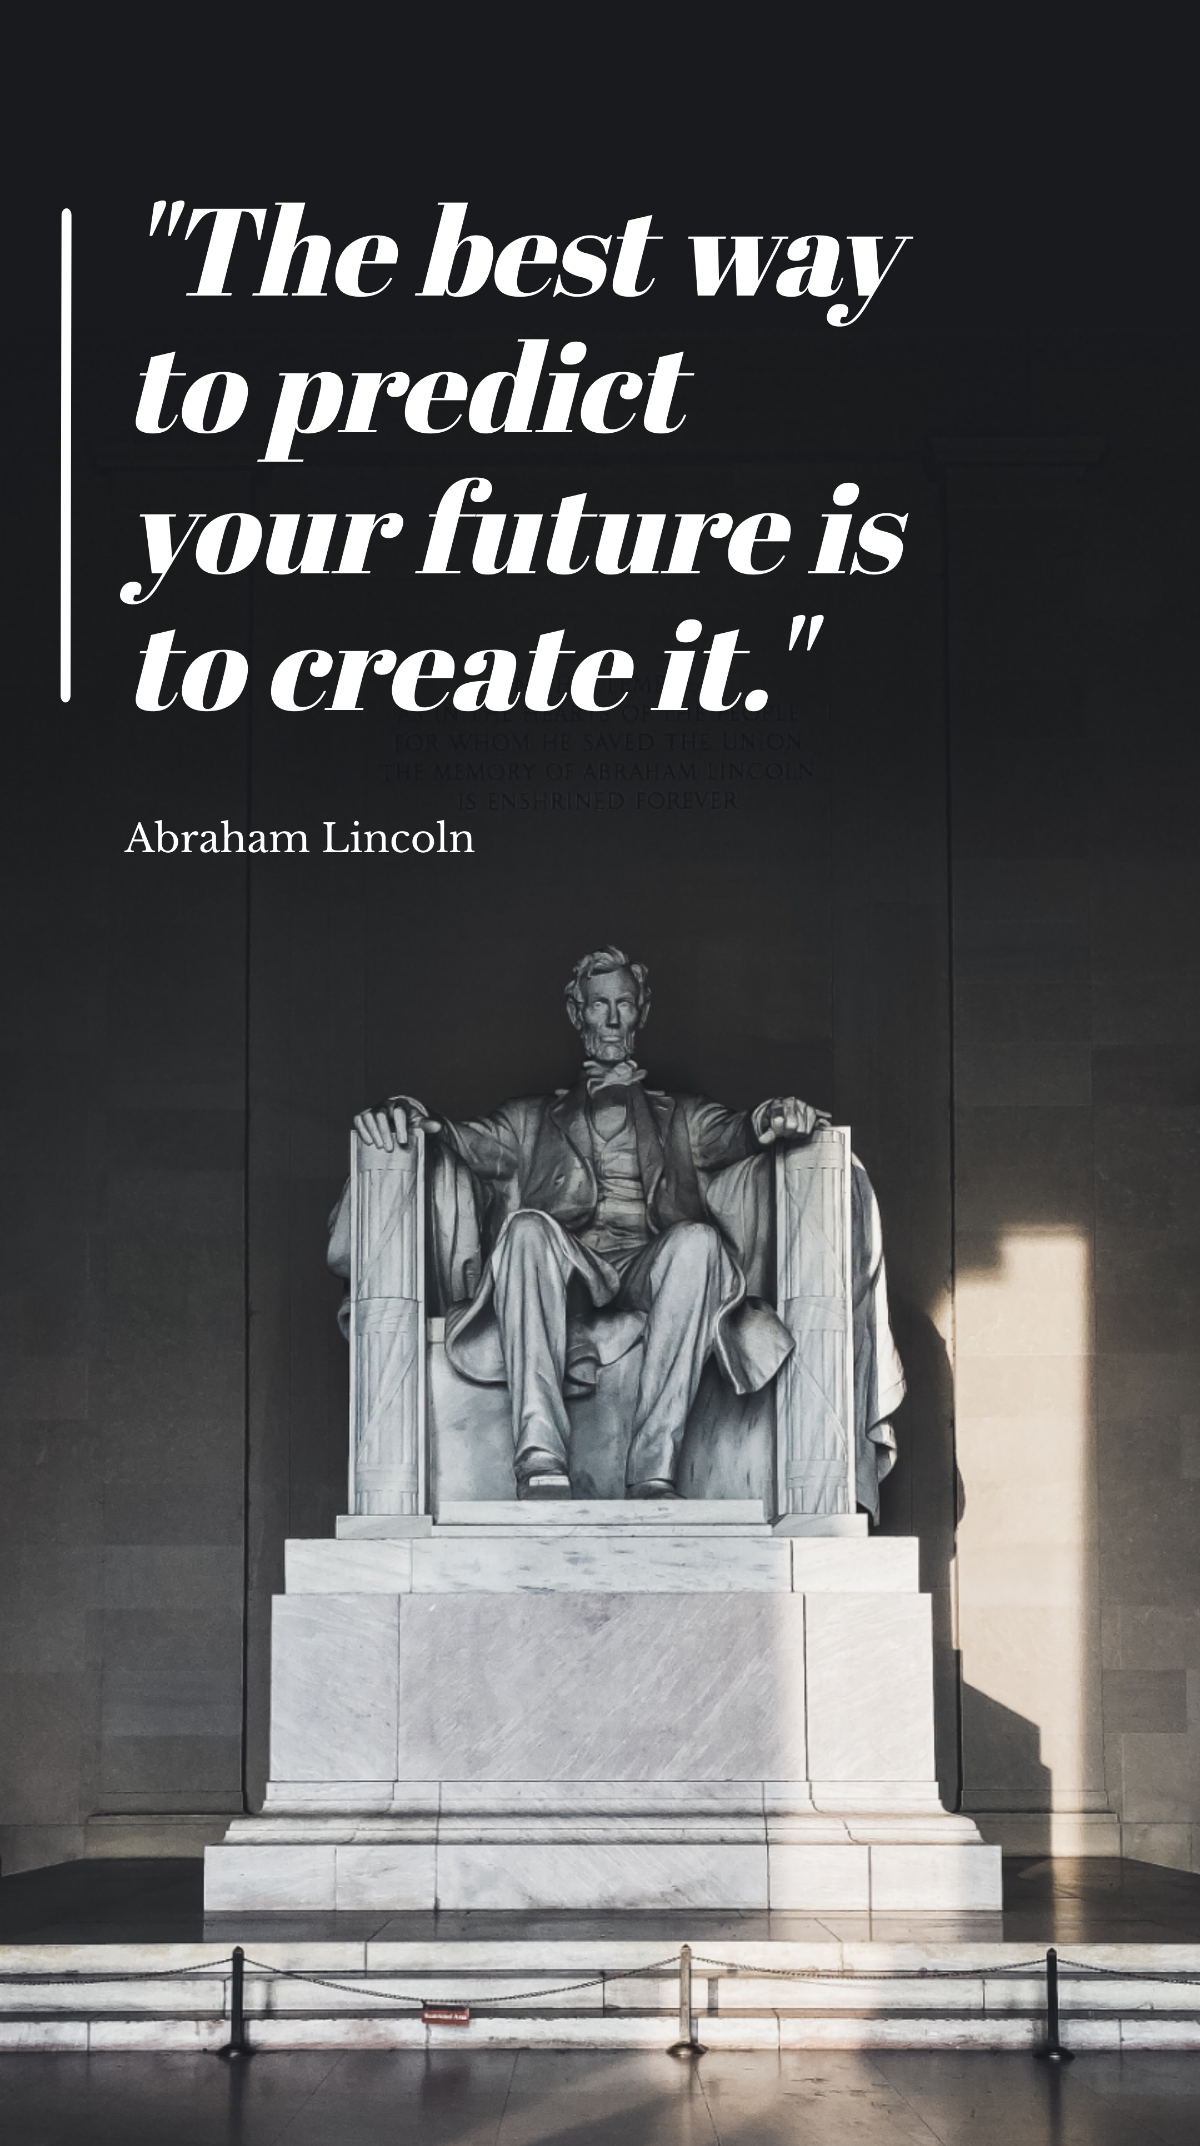 Abraham Lincoln - The best way to predict your future is to create it